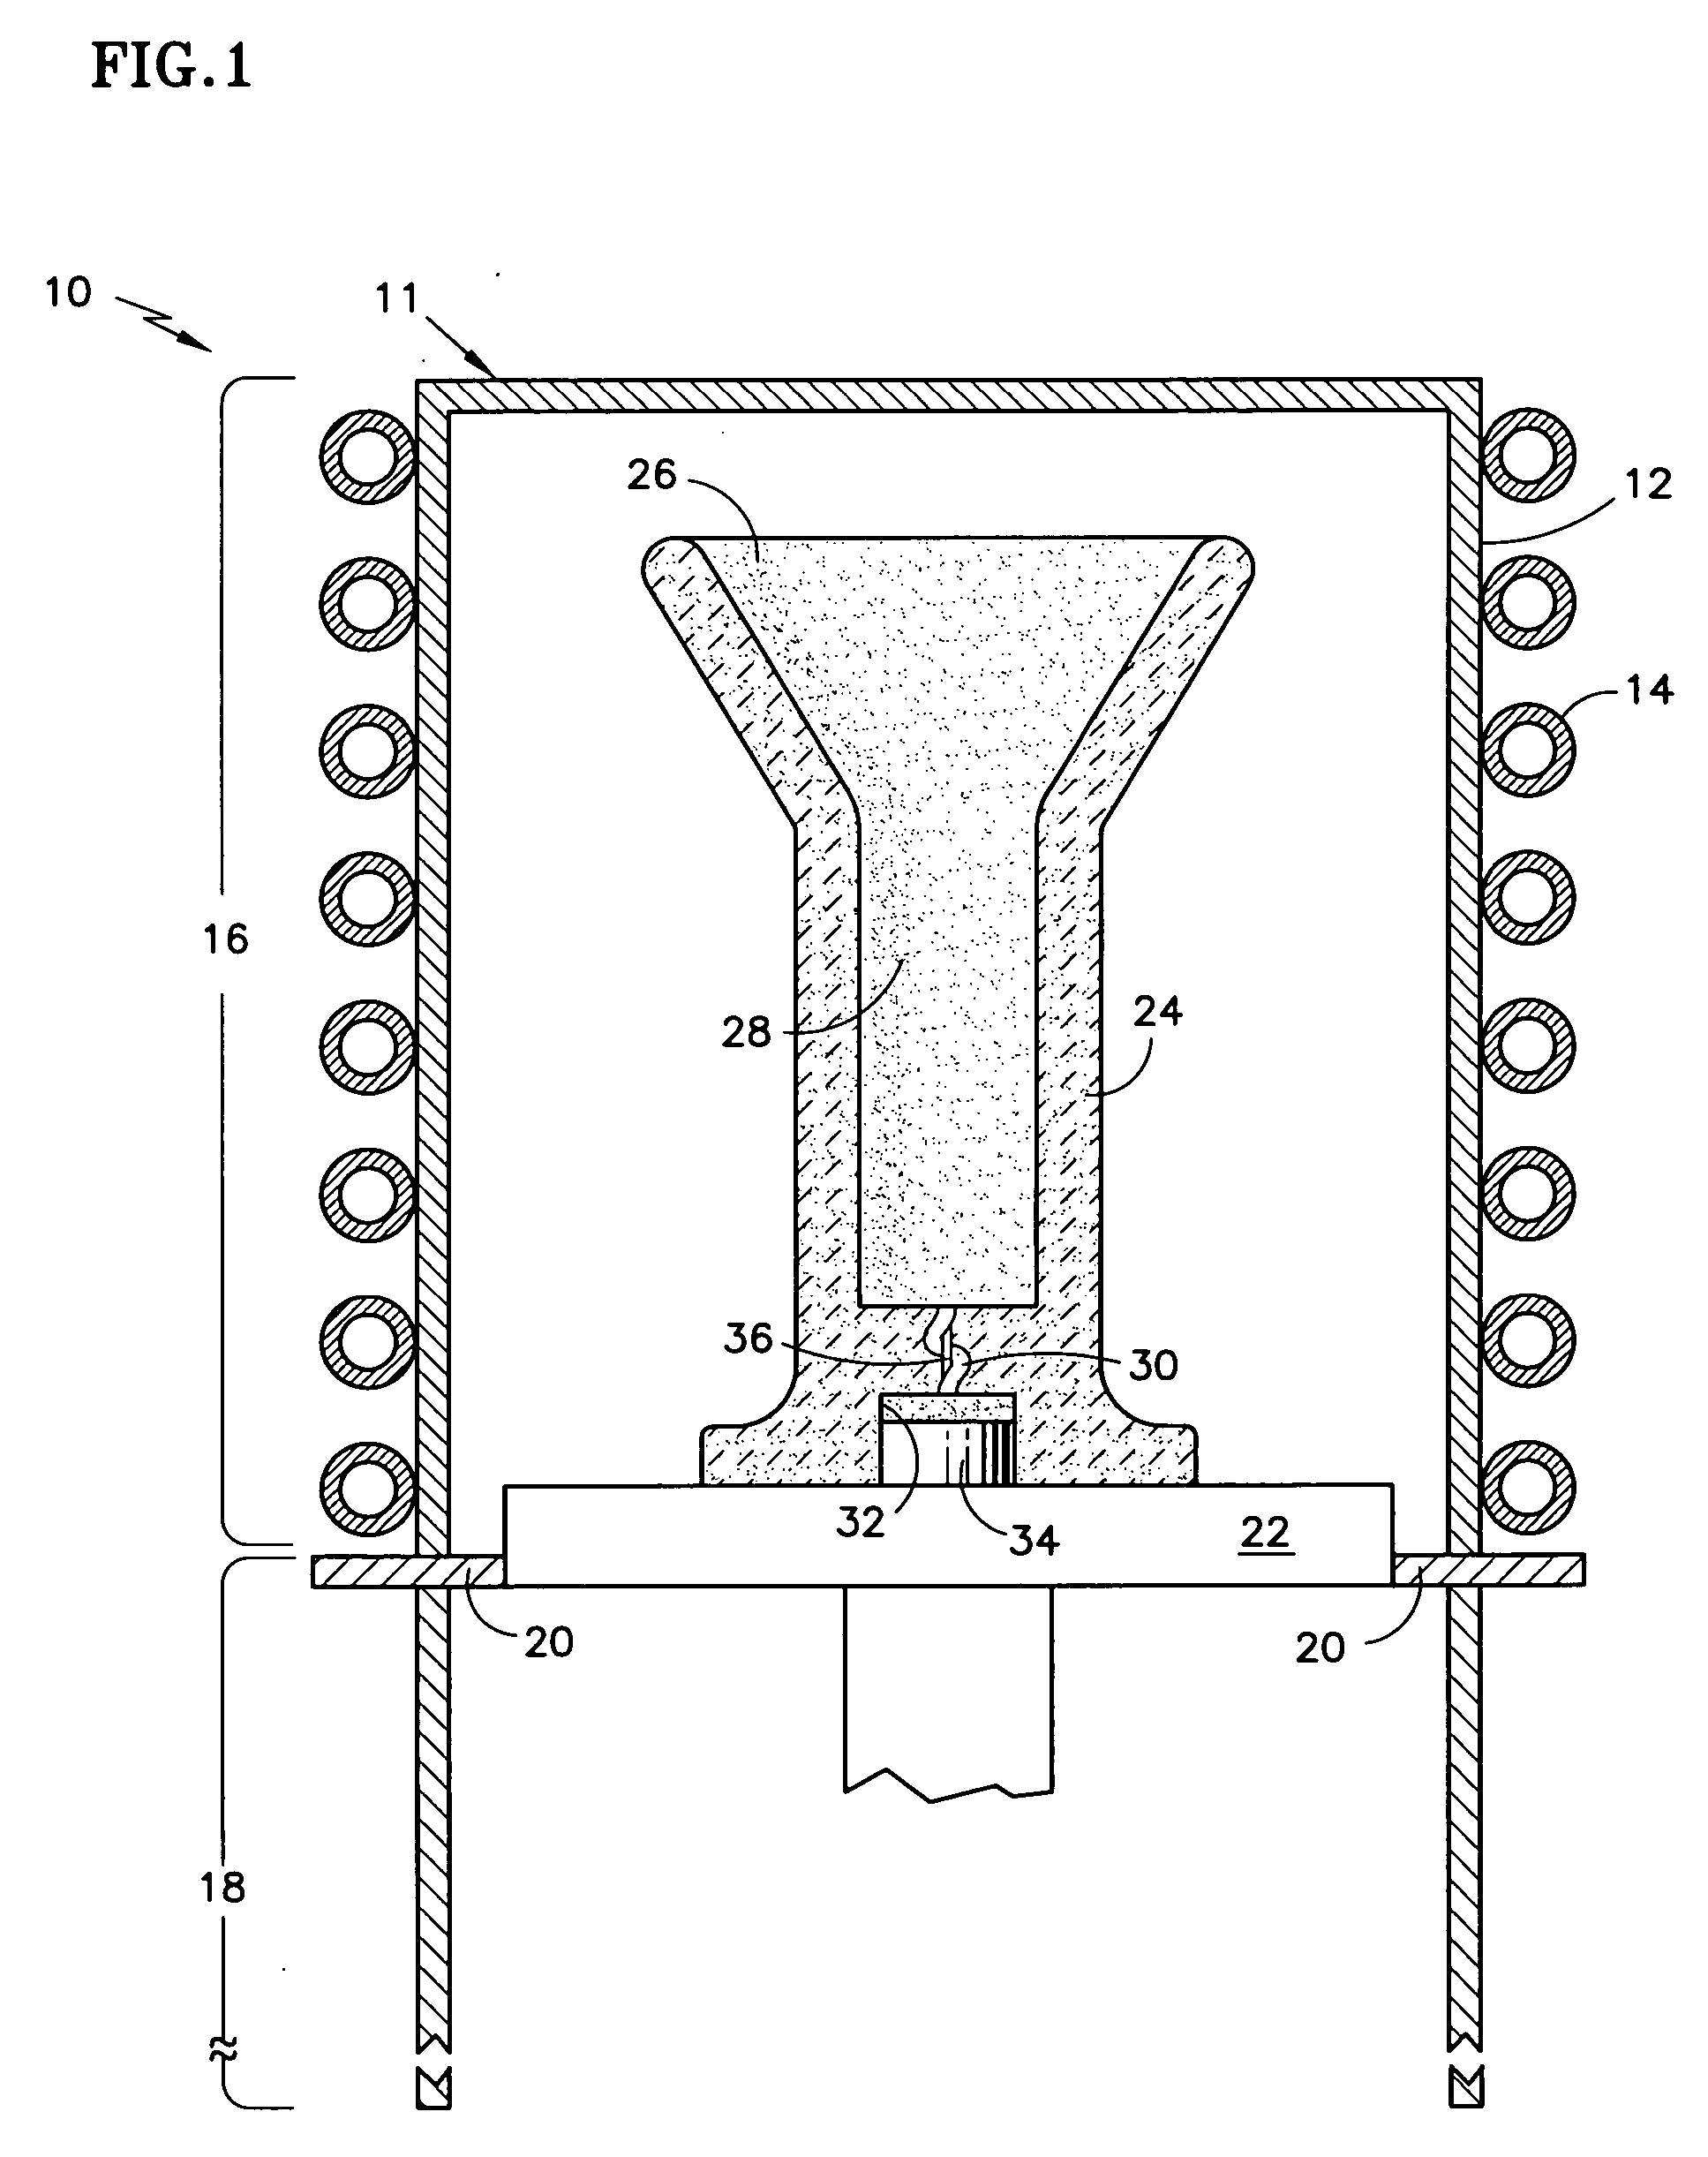 Single crystal investment cast components and methods of making same